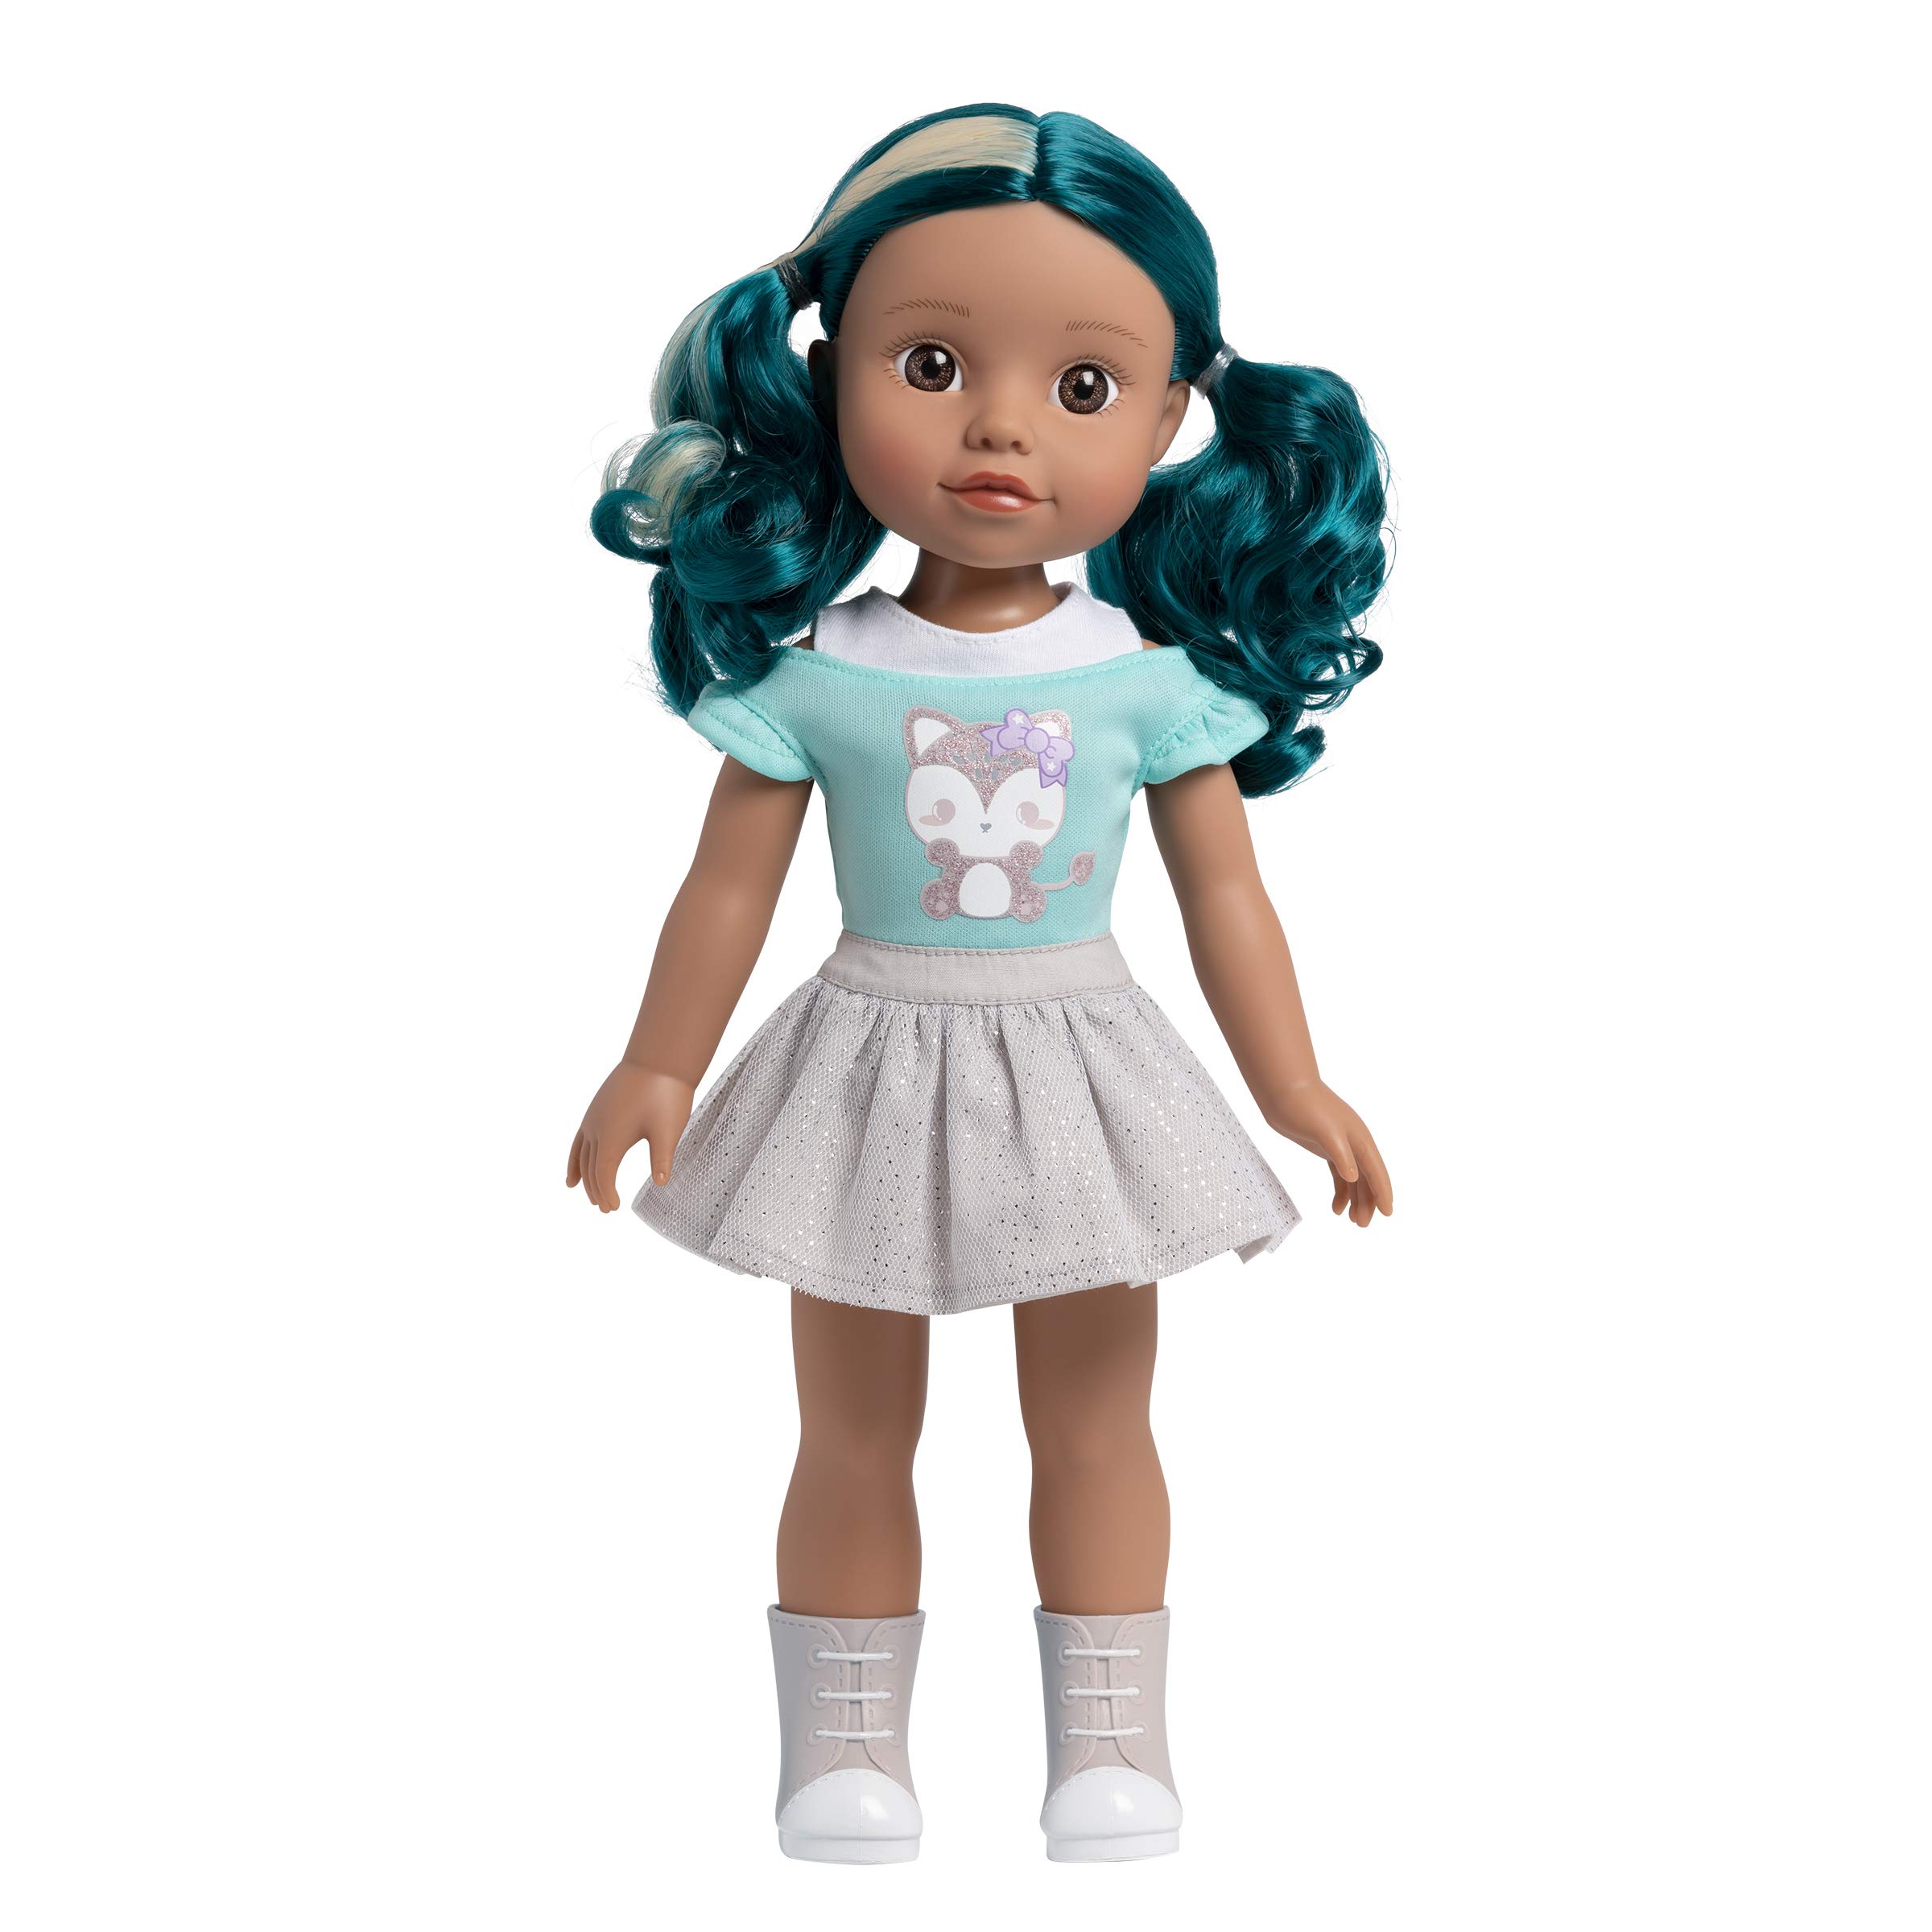 Adora 14 inch Doll Be Bright Doll Alma - Wolf, Hair Color Changes in The Sun, for Kids Age 3+